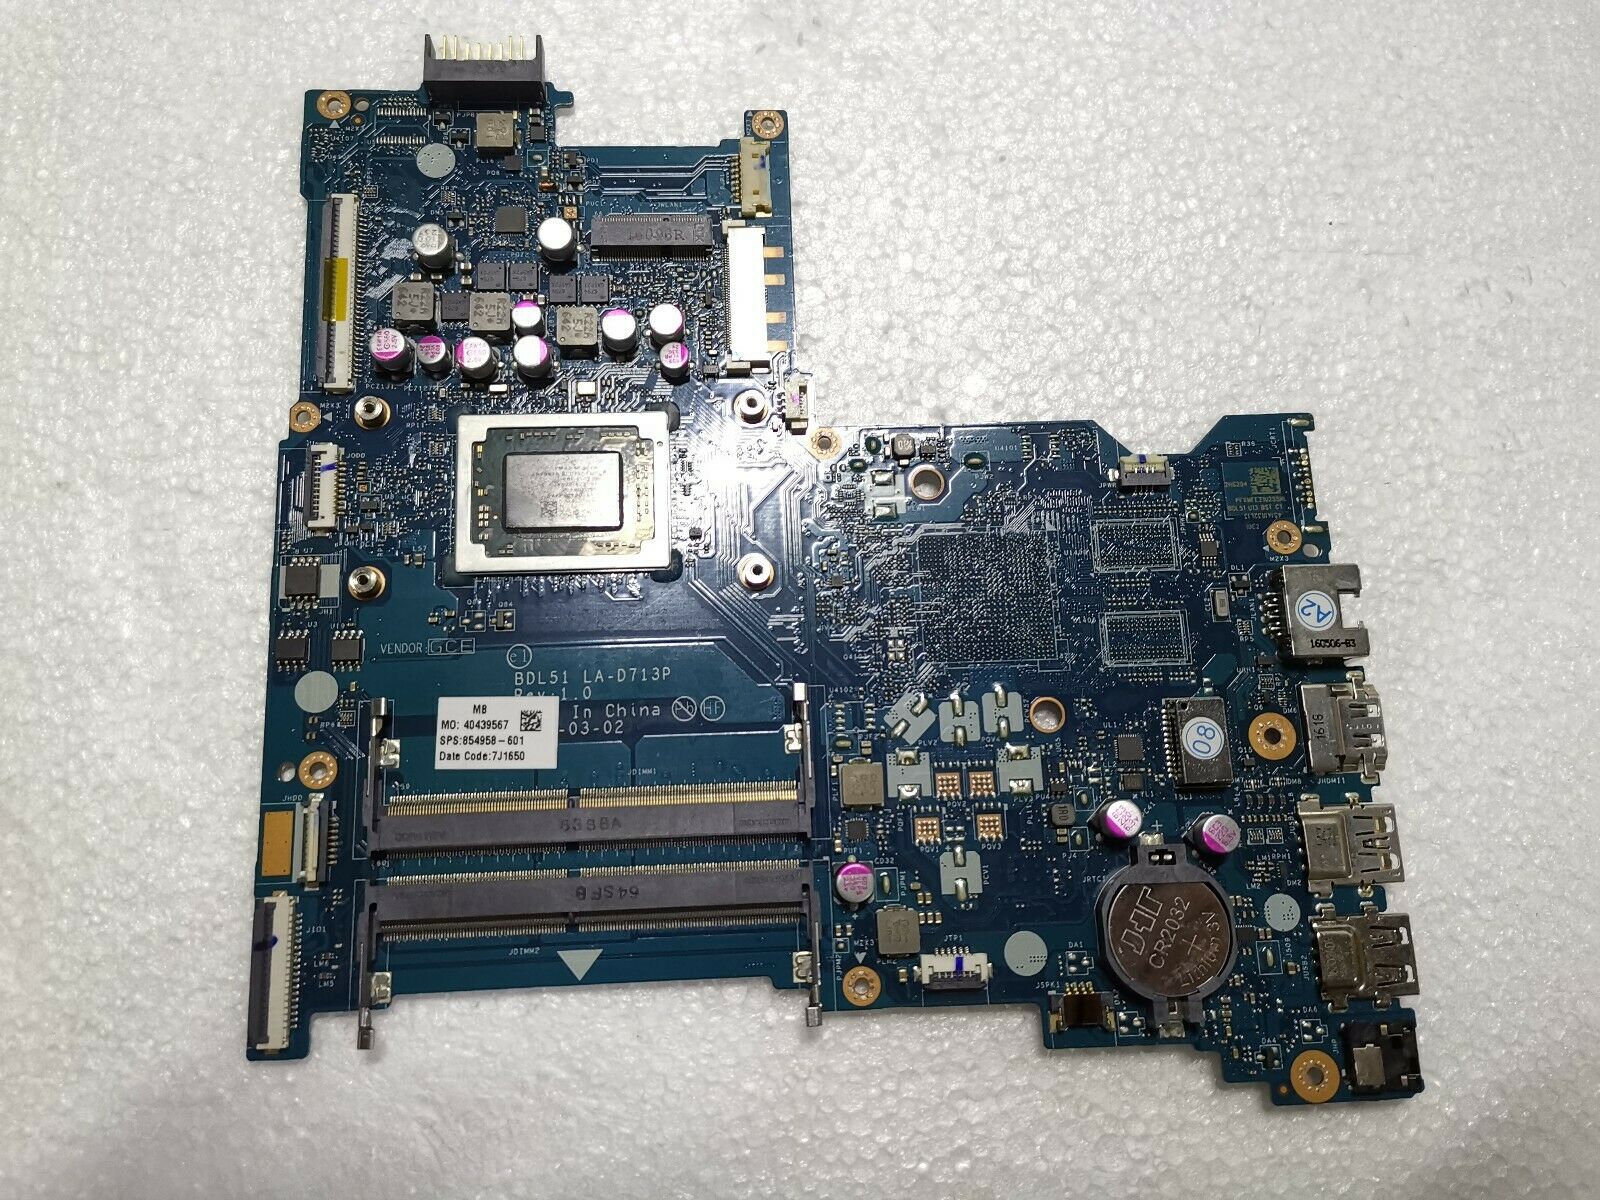 HP 854958-601 15-BA AMD A10-9600P 2.4GHz DDR4 Laptop Motherboard LA-D713P Compatible CPU Brand: AMD Brand: - Click Image to Close